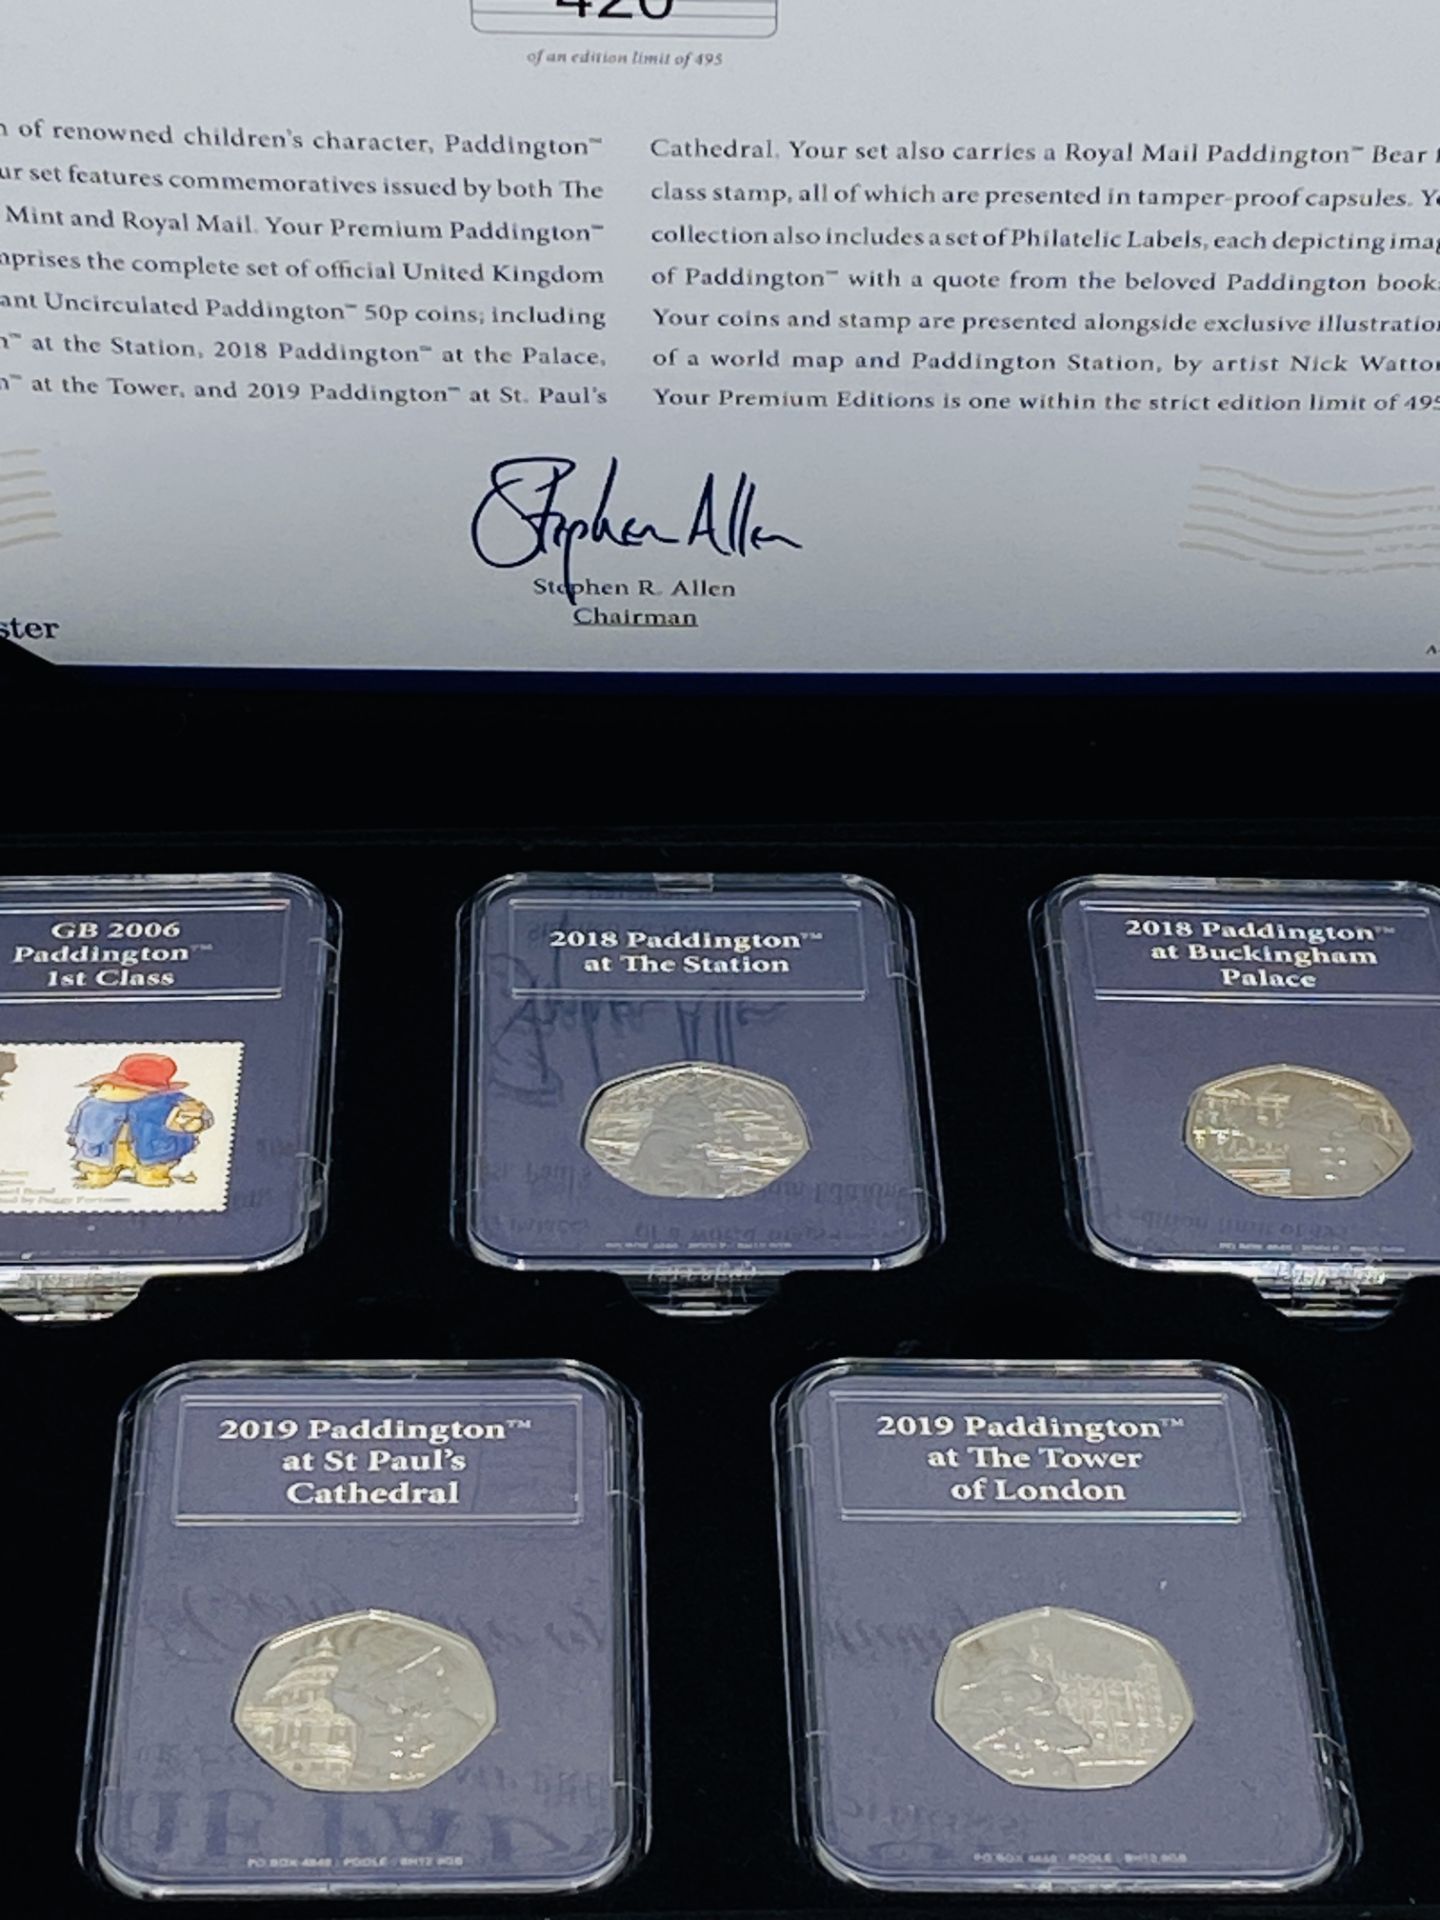 Westminster Limited Edition Paddington Coin and Stamp Capsule collection - Image 2 of 3